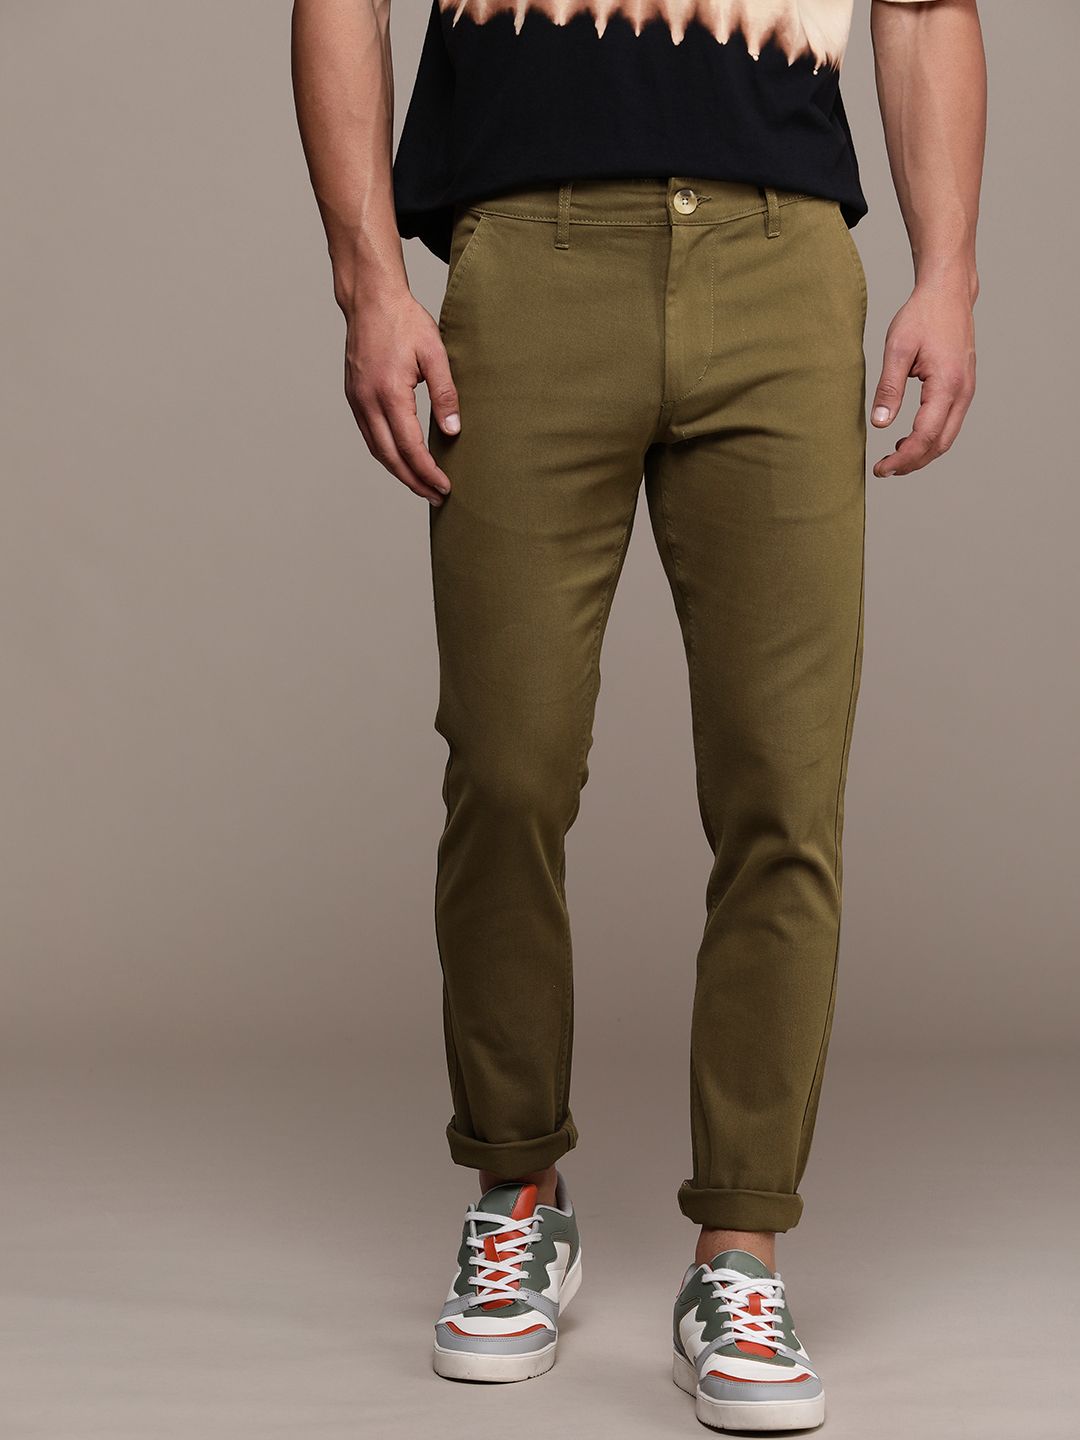 Olive Green Solid Slim Fit Chinos Trousers